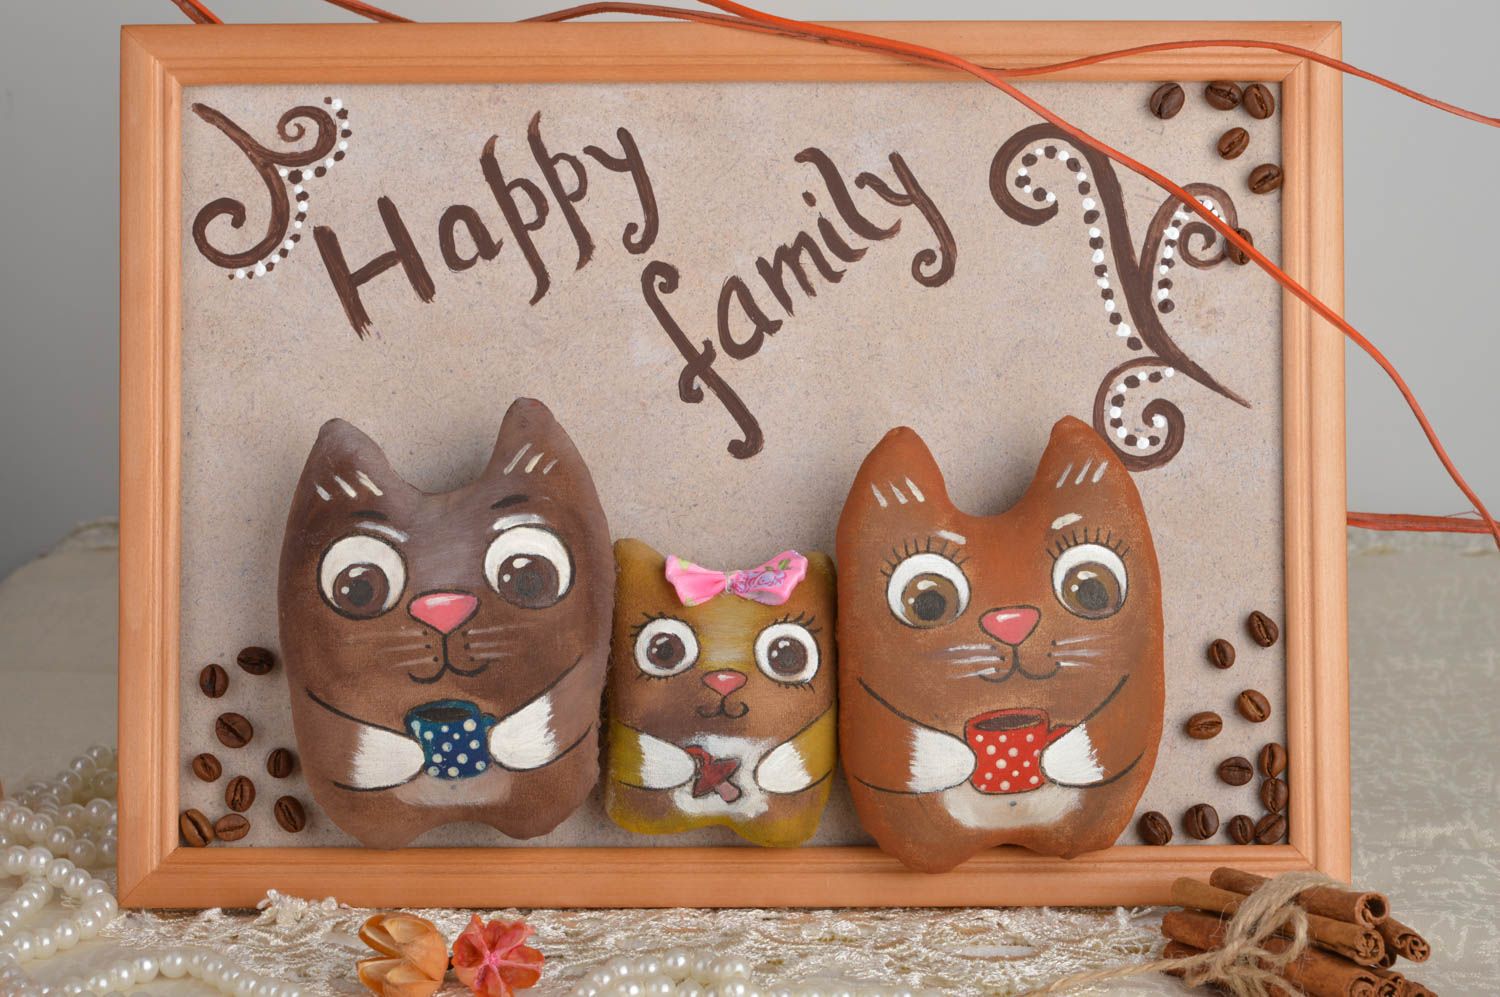 Handmade decorative wall panel with soft toys flavored cats interior decor ideas photo 1